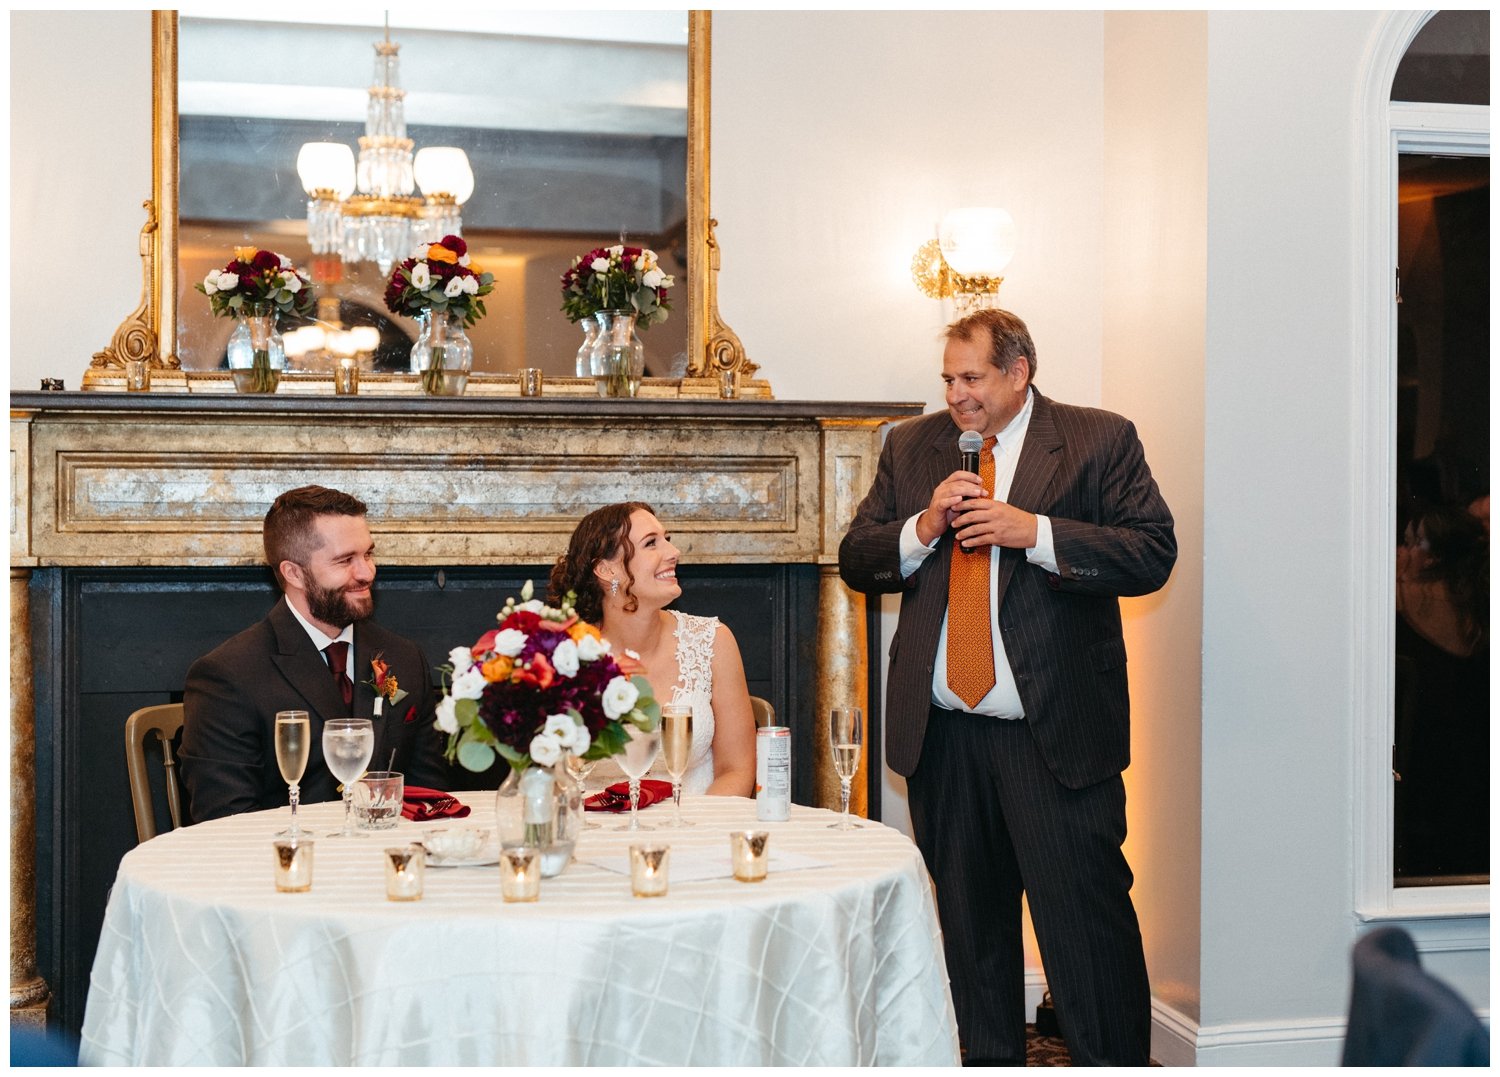 A guest gives a speech at the intimate destination wedding